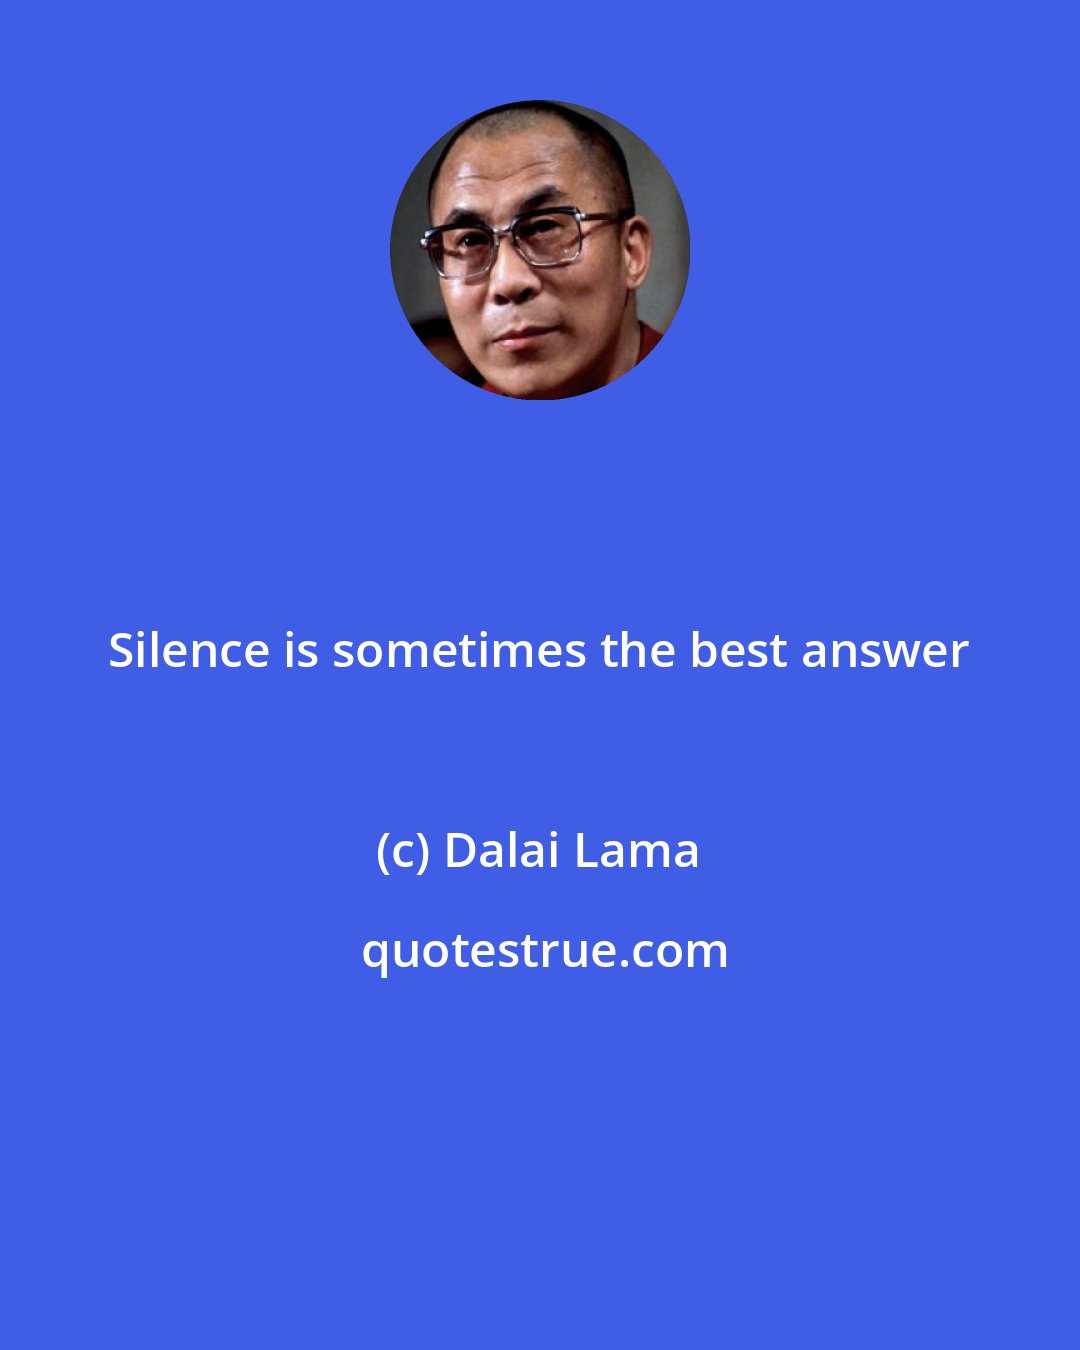 Dalai Lama: Silence is sometimes the best answer